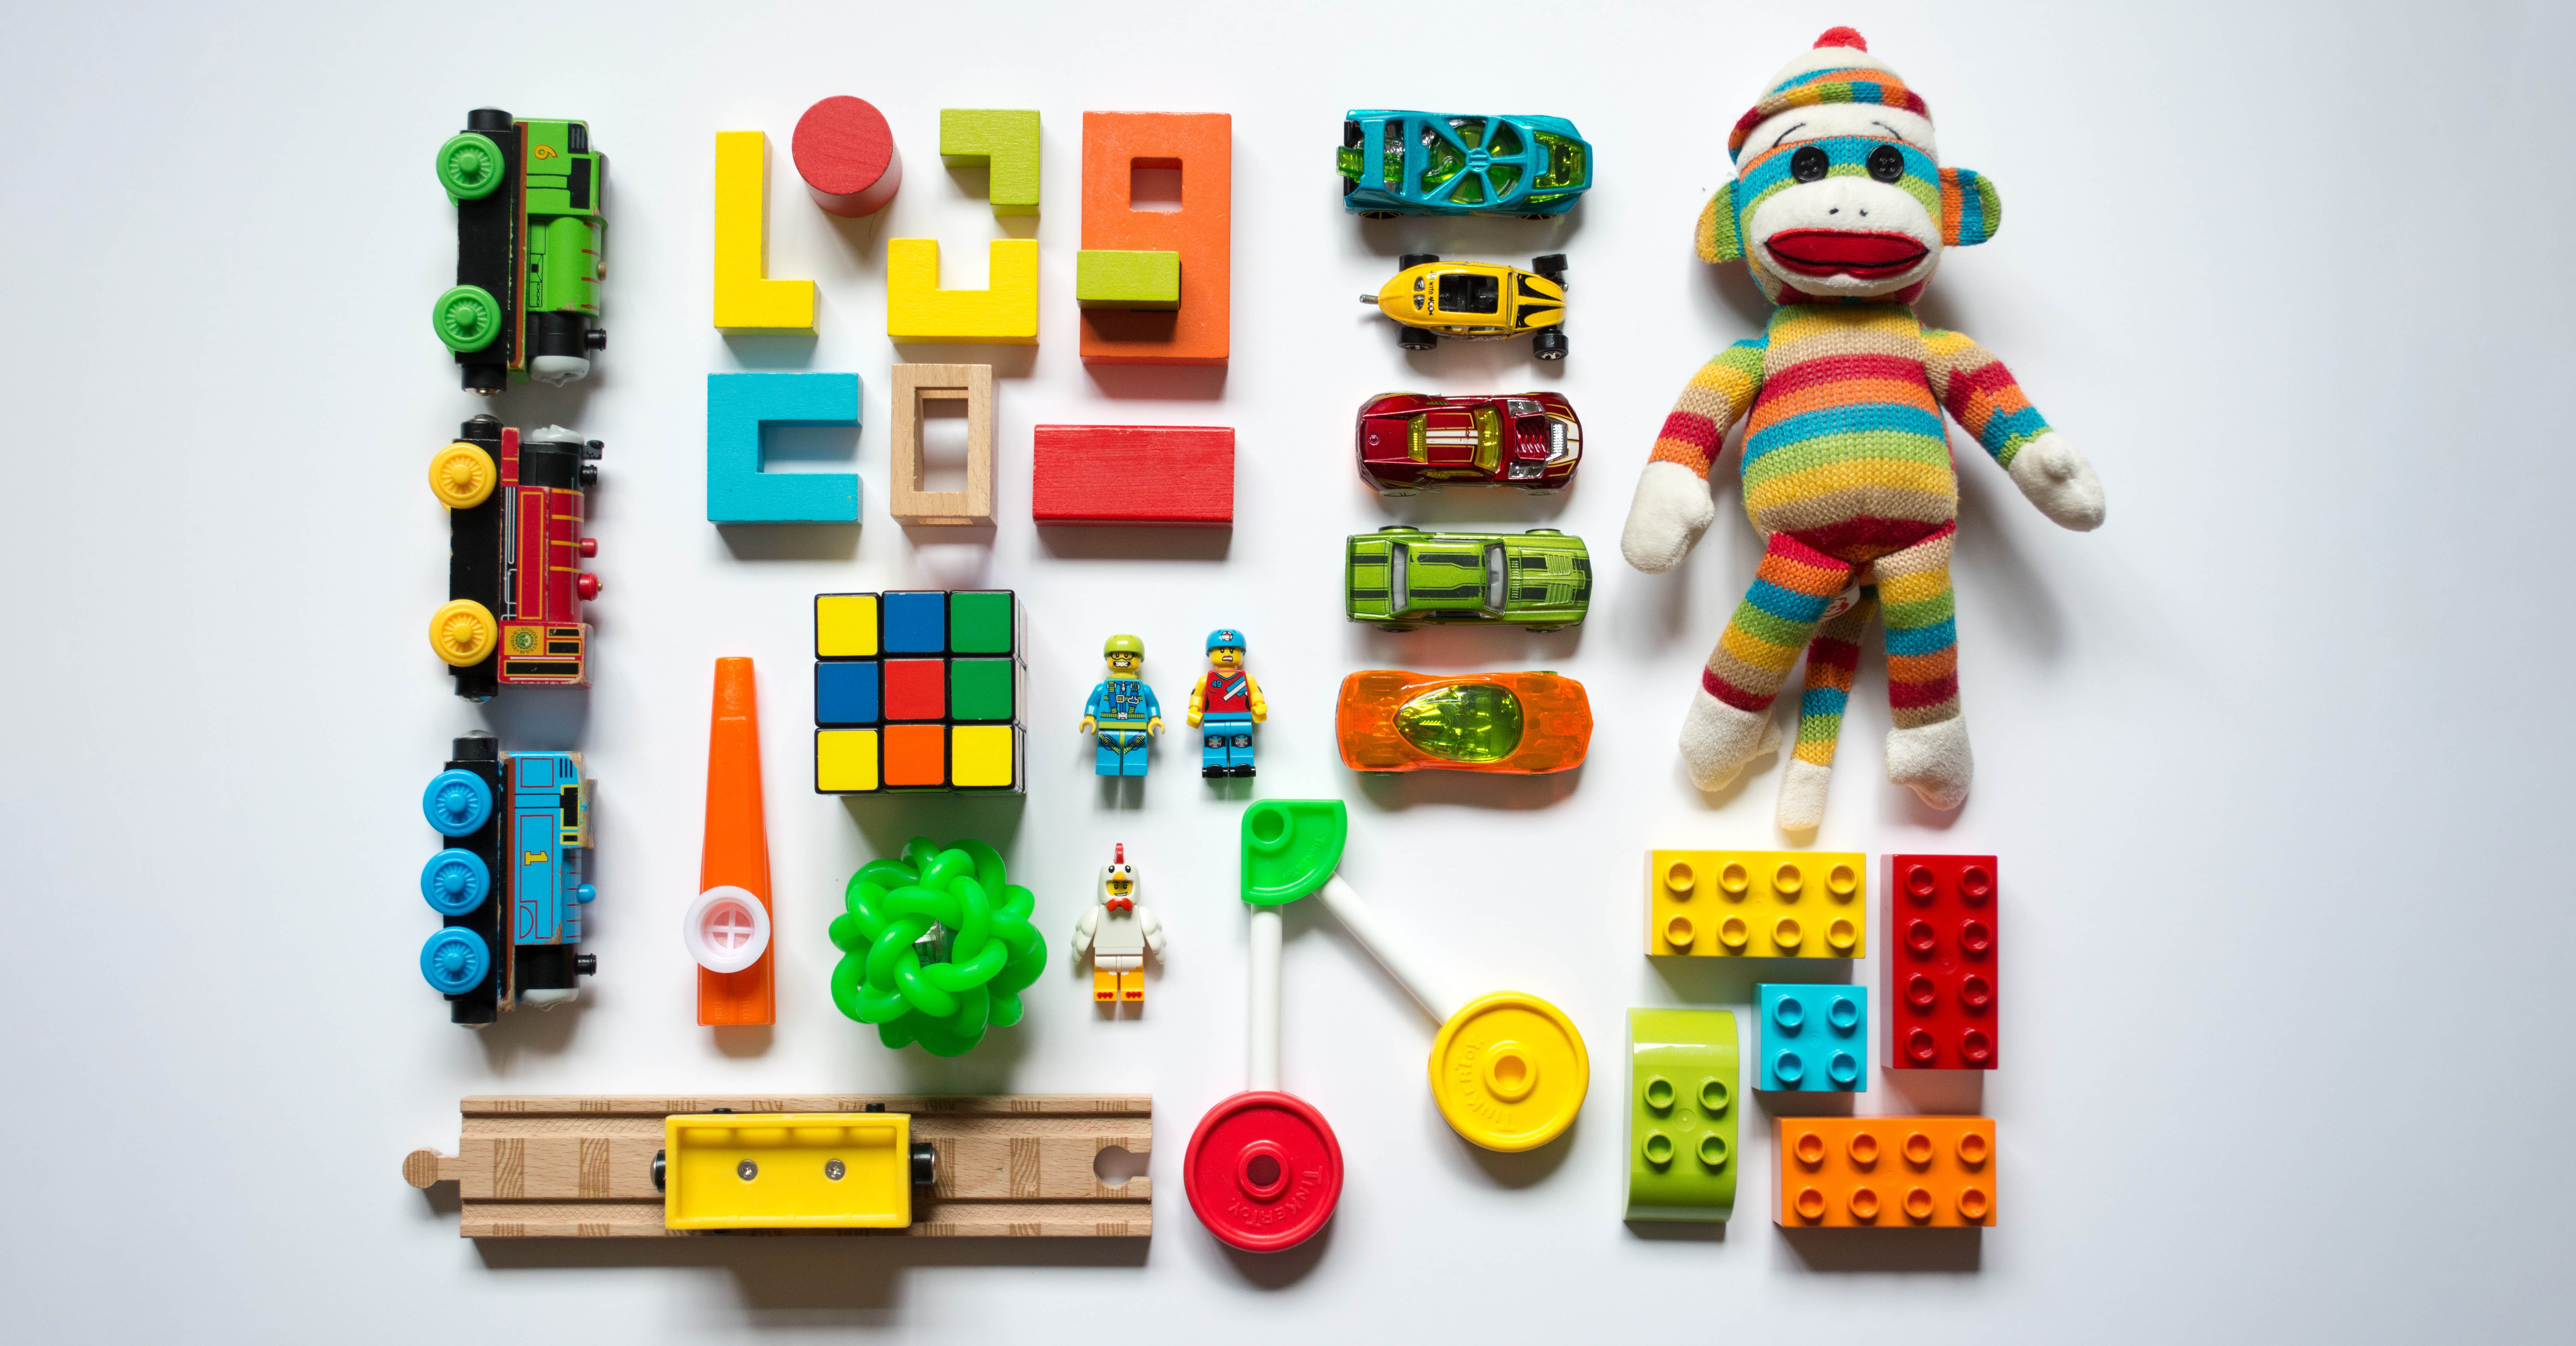 In This Season of Giving, Watch Out for Harmful Chemicals in Plastic Toys